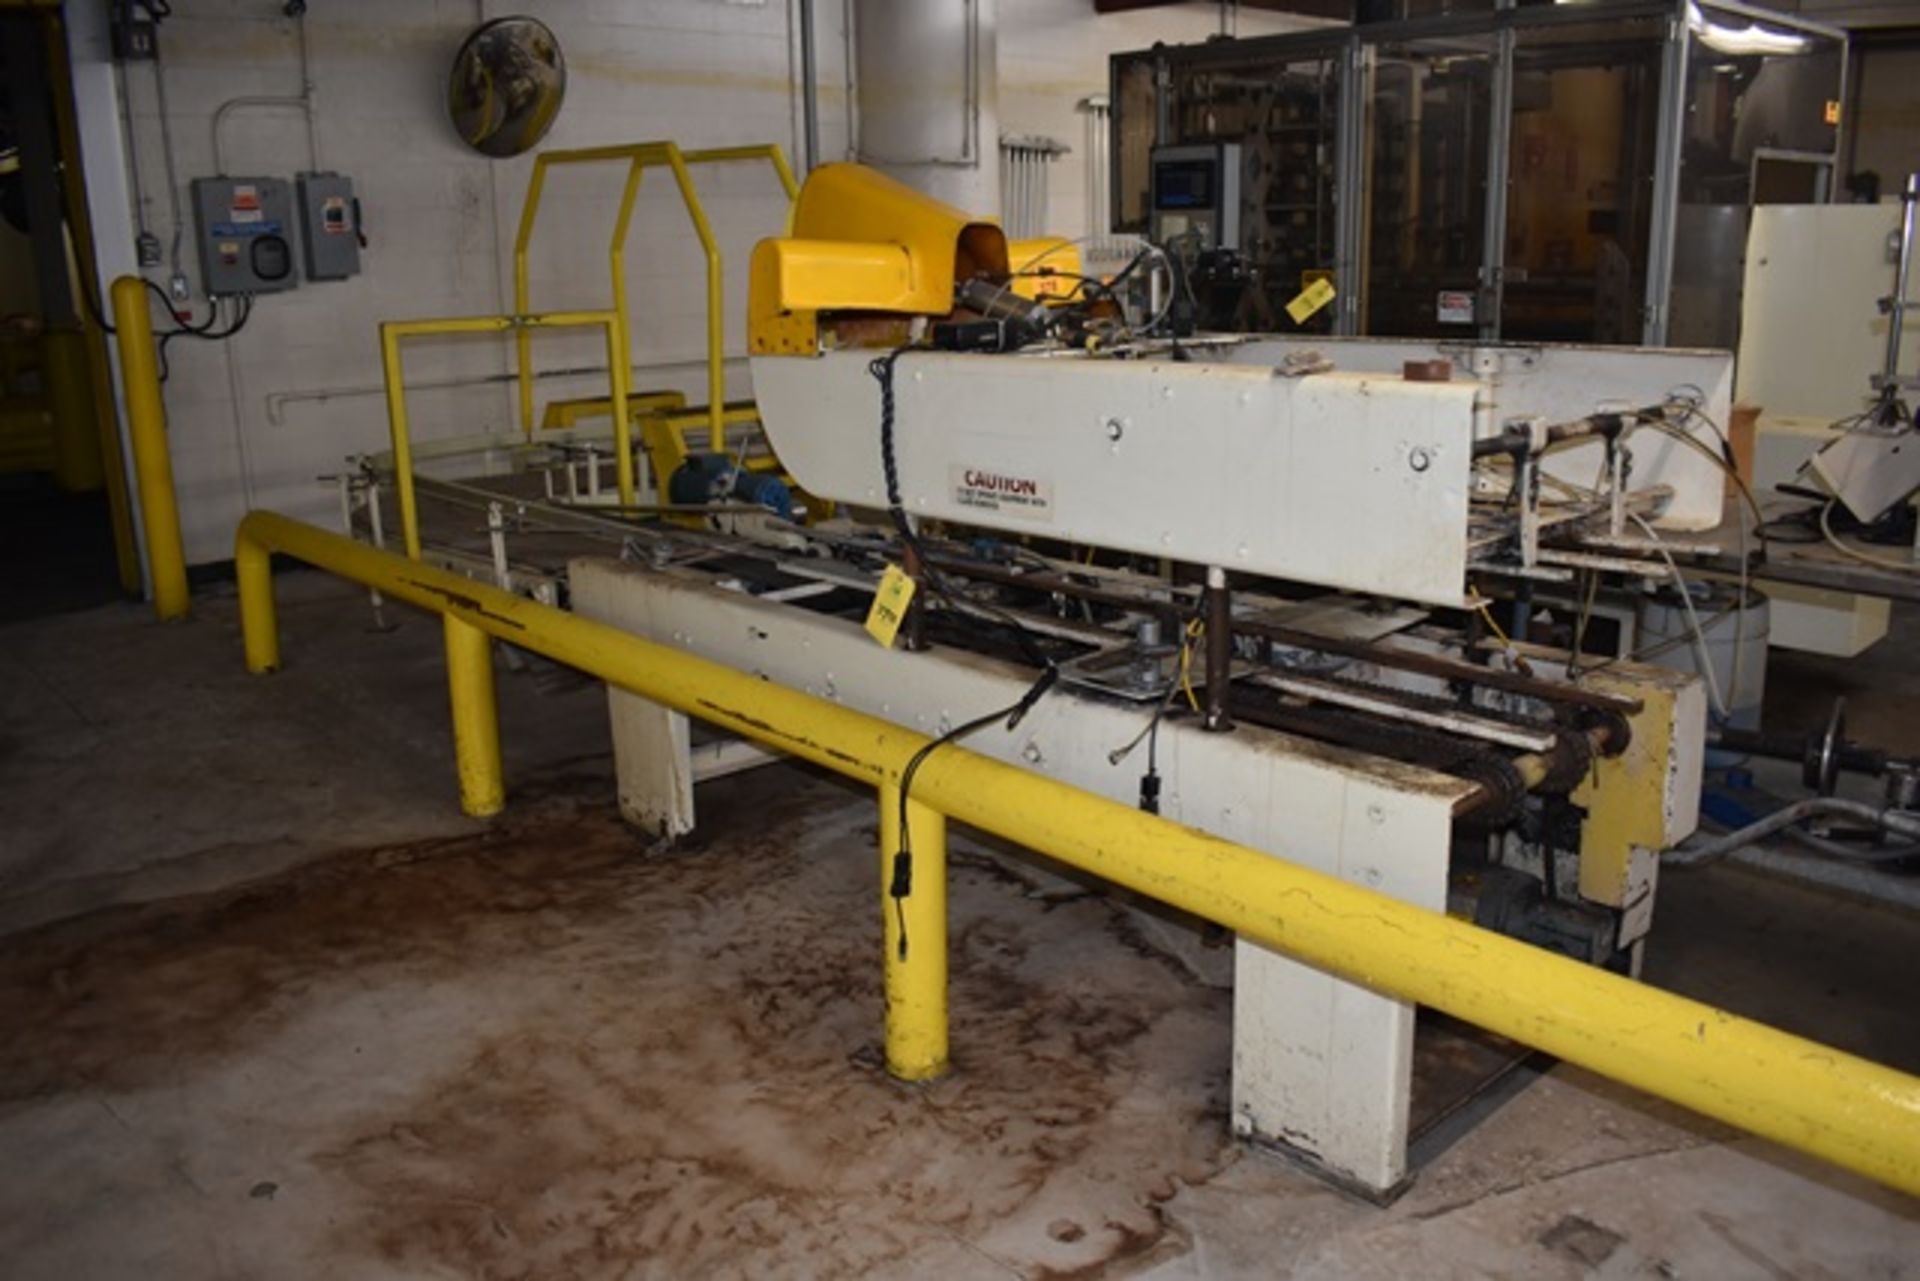 Elliot case sealer, model 85-AT, s/n 88323, with gear drive, control panel,